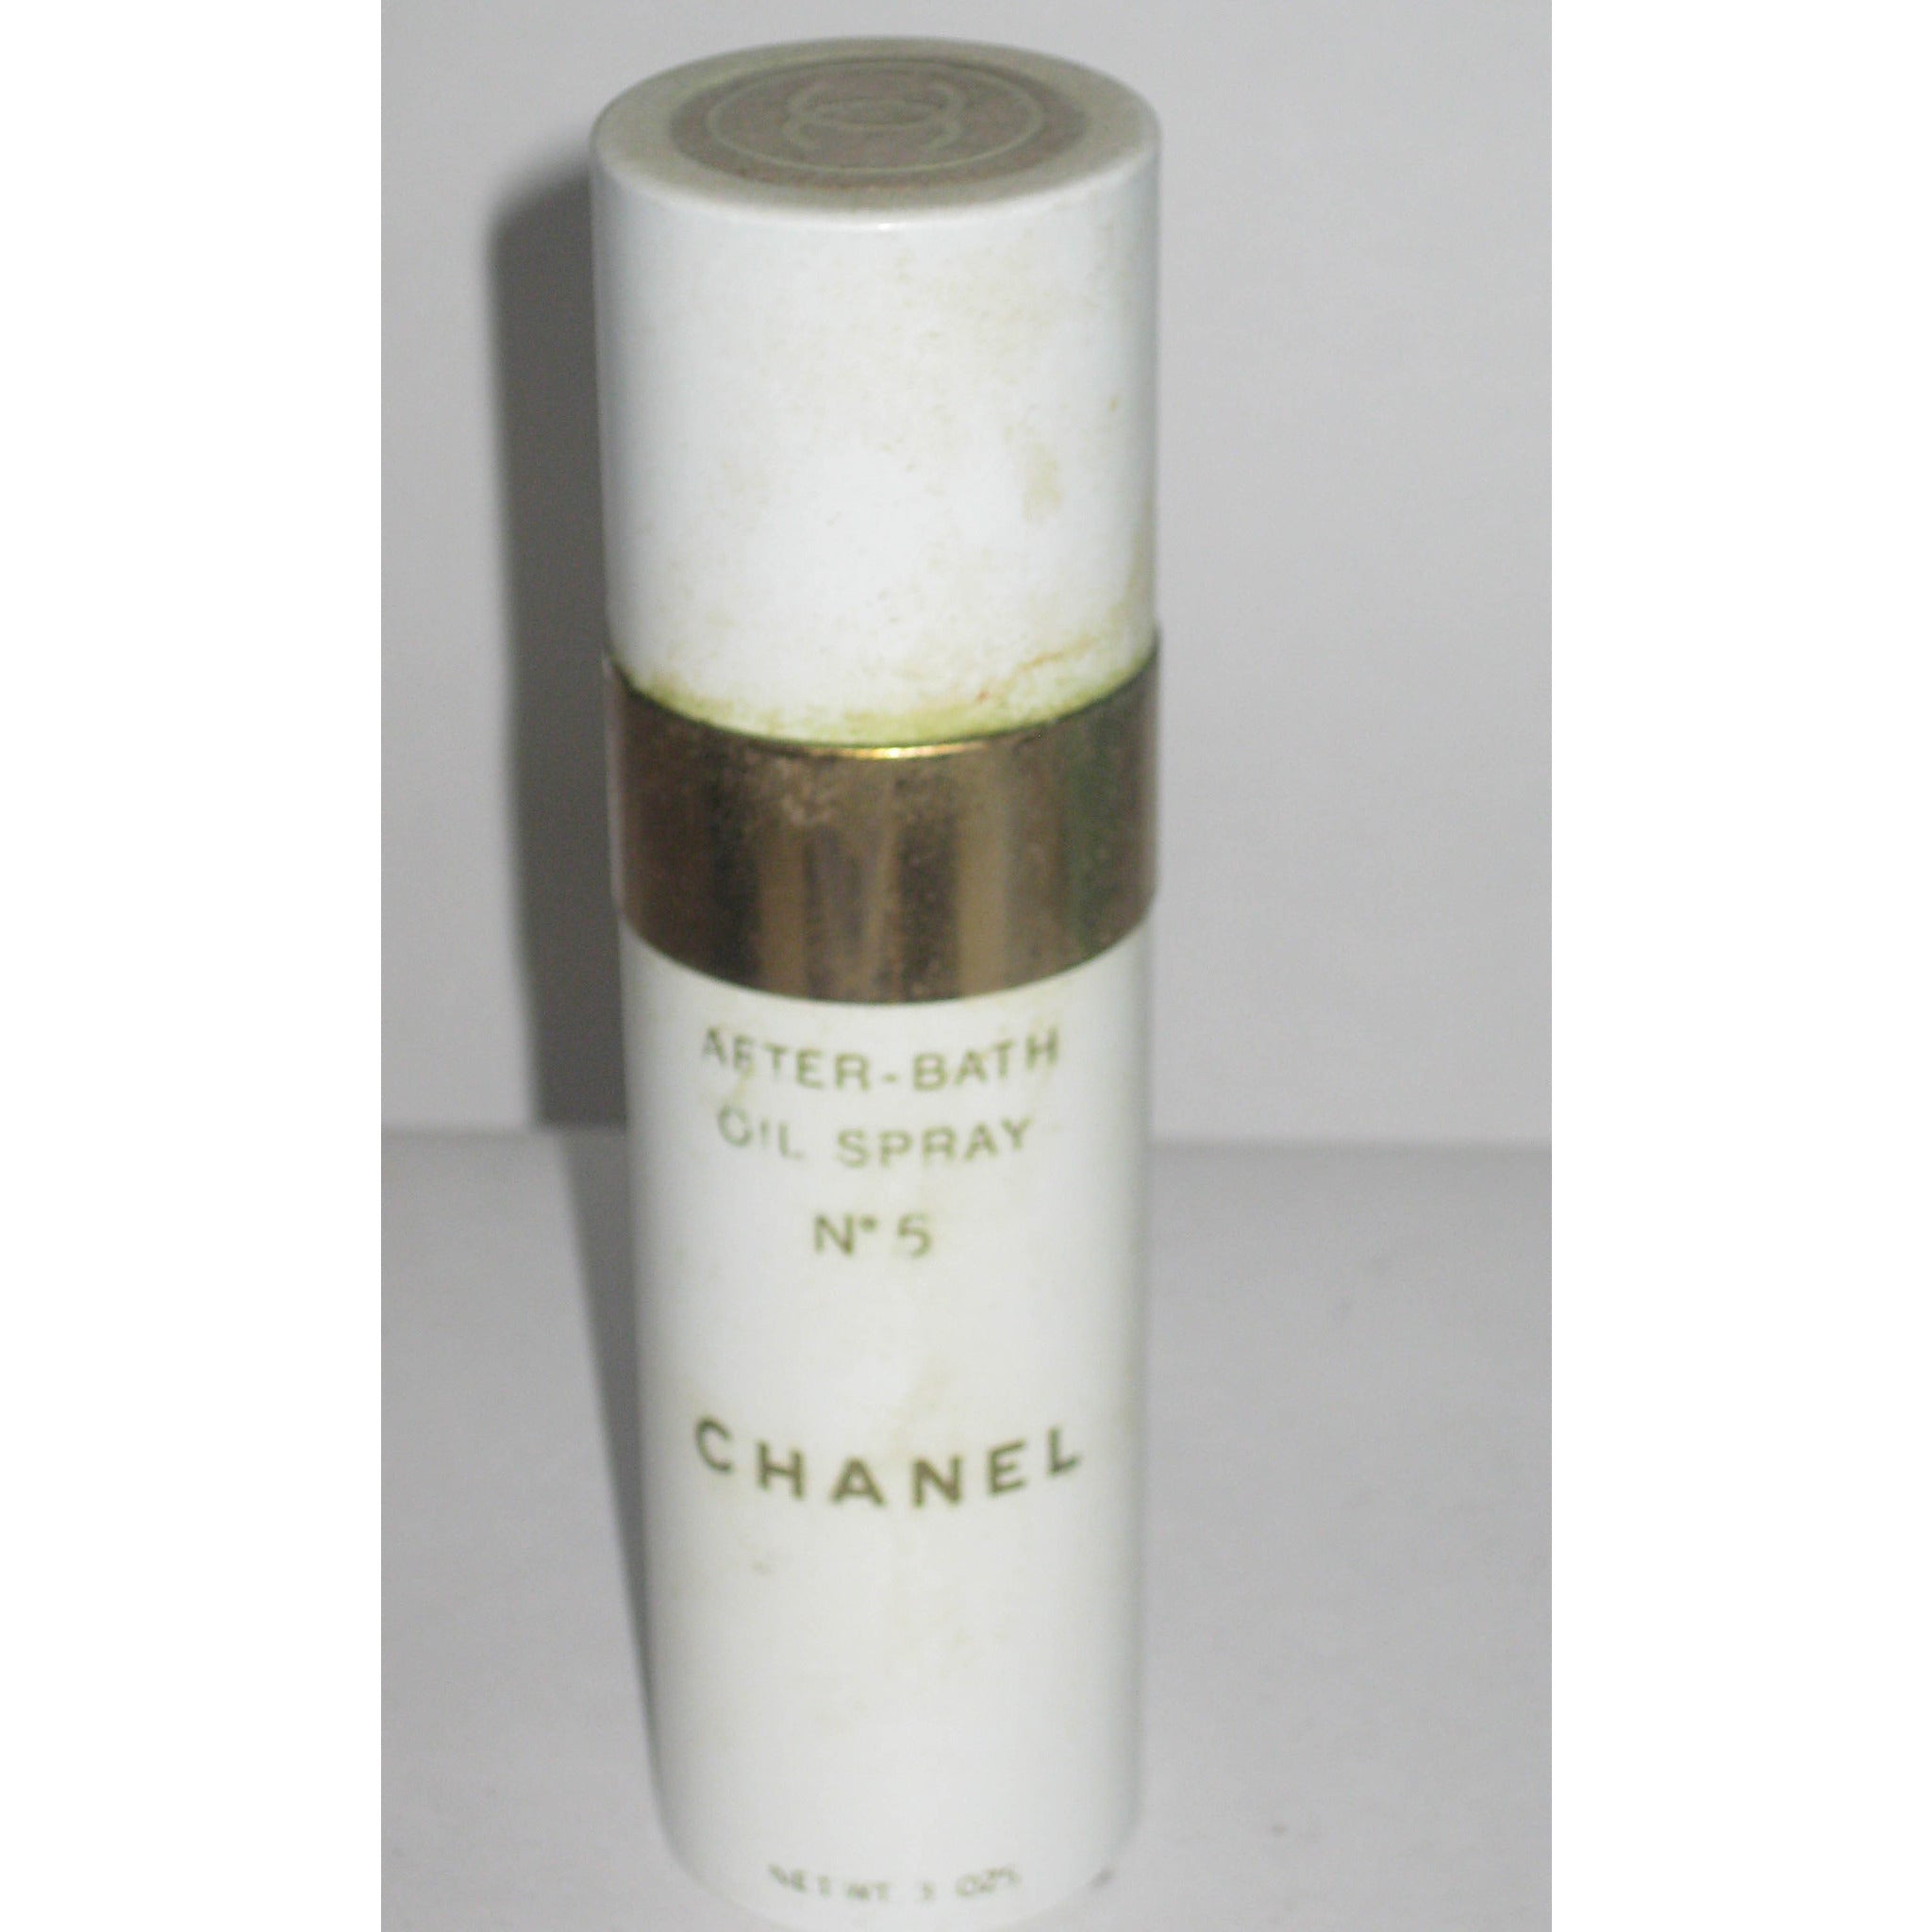 Chanel No 5 After-Bath Oil Spray – Quirky Finds